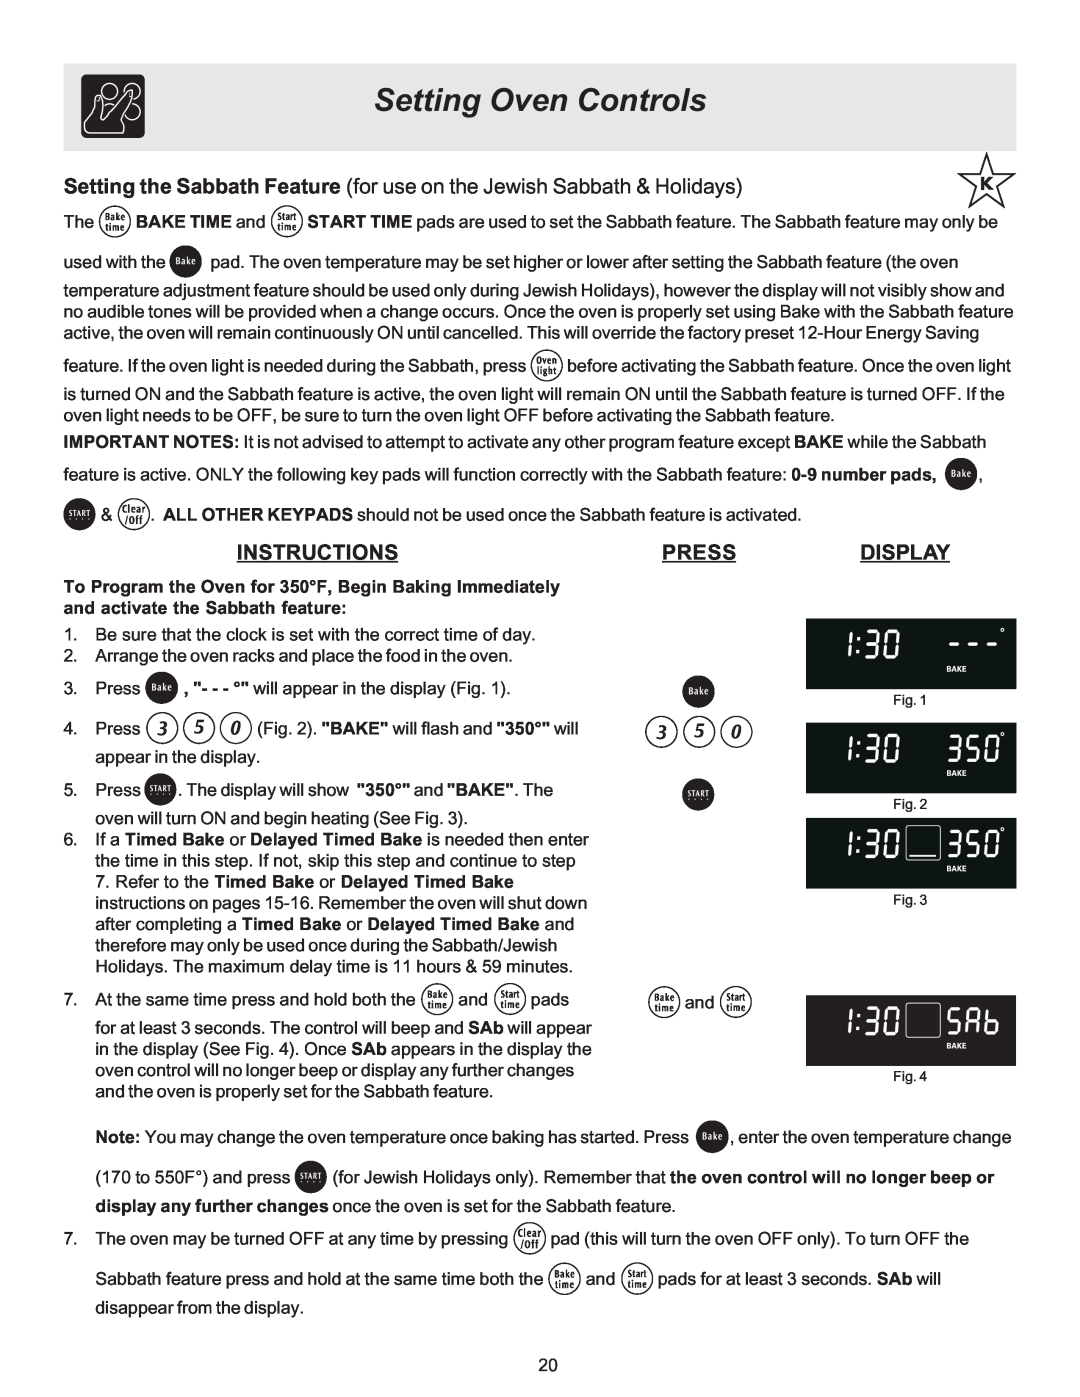 Frigidaire 316417137 REV-A Setting the Sabbath Feature for use on the Jewish Sabbath & Holidays, Setting Oven Controls 